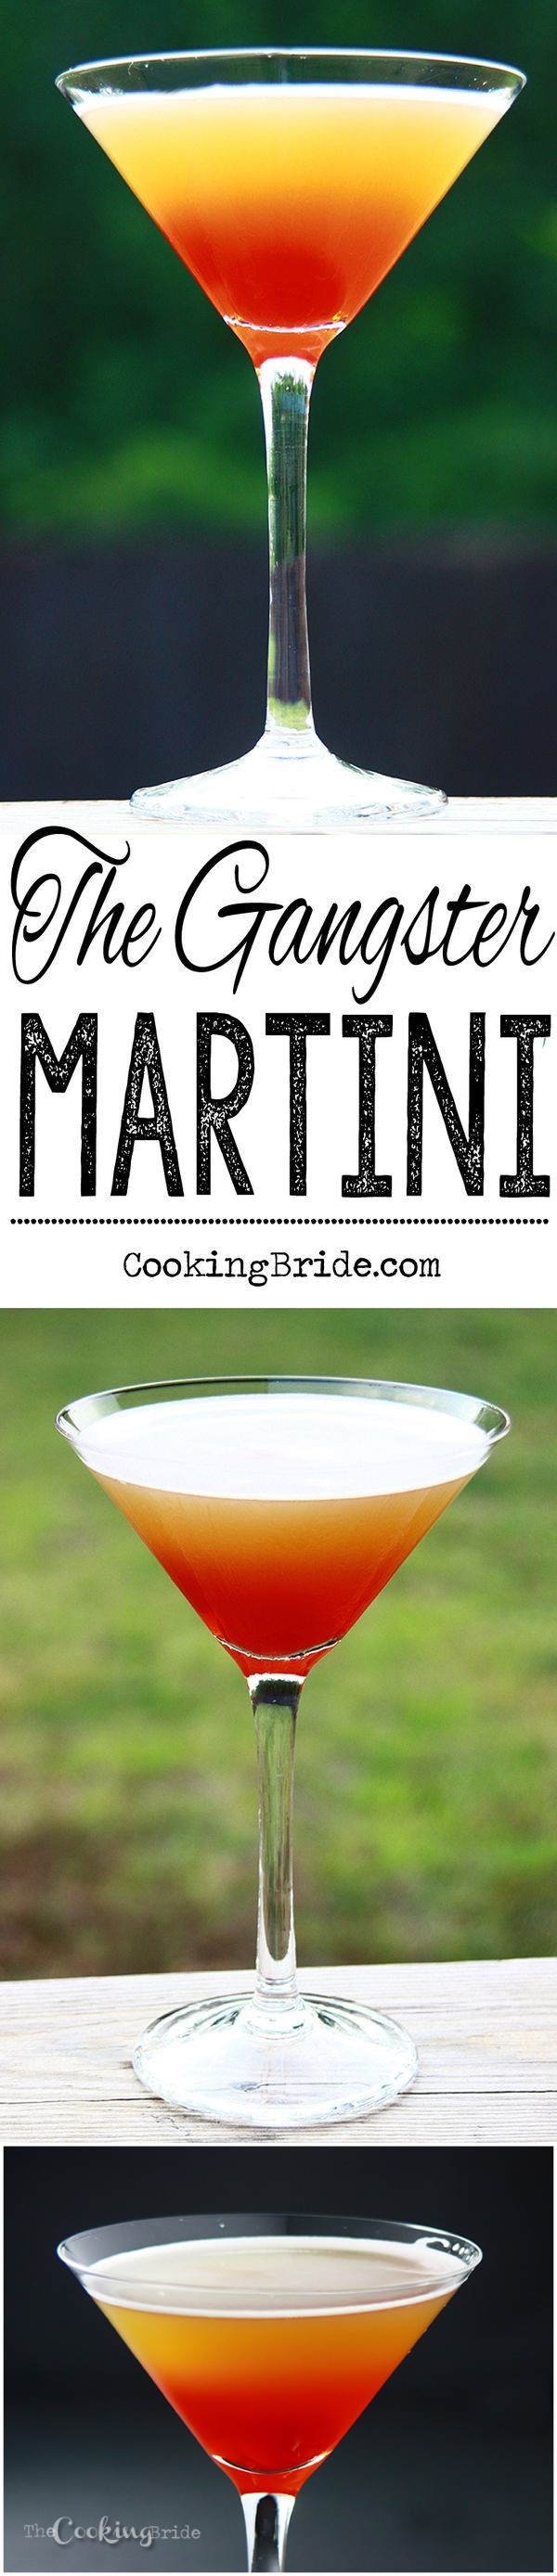 The Gangster Martini